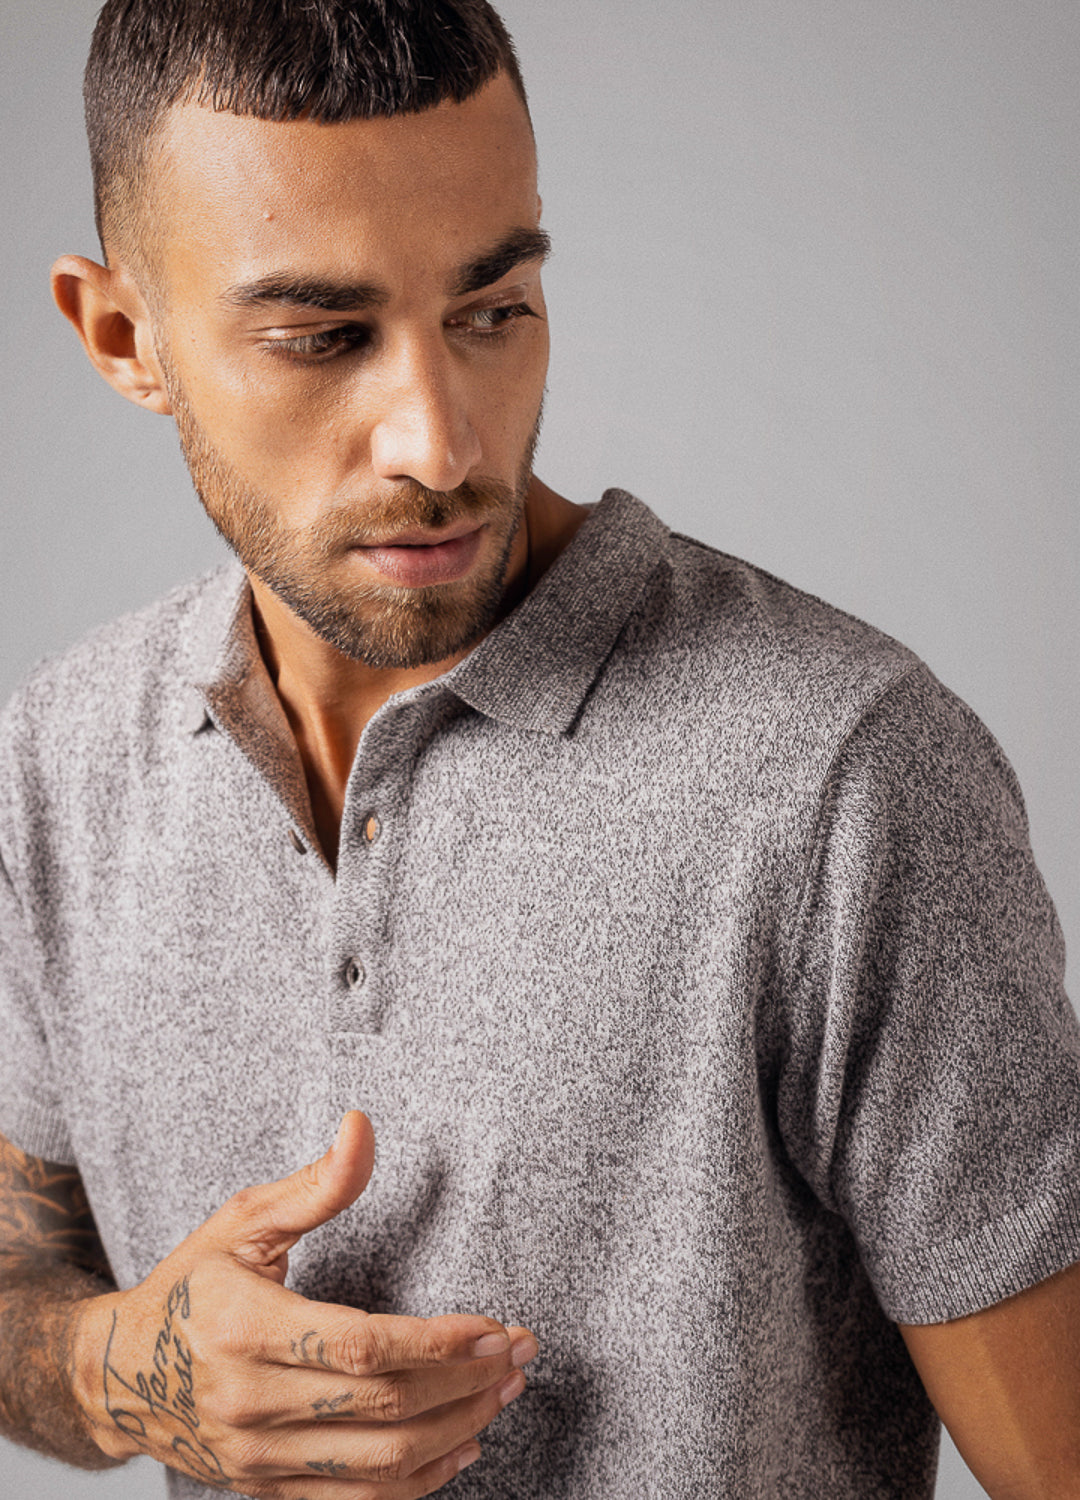 Pebble Knit Sustainable Organic Cotton Grey Polo T Shirt For Men Online